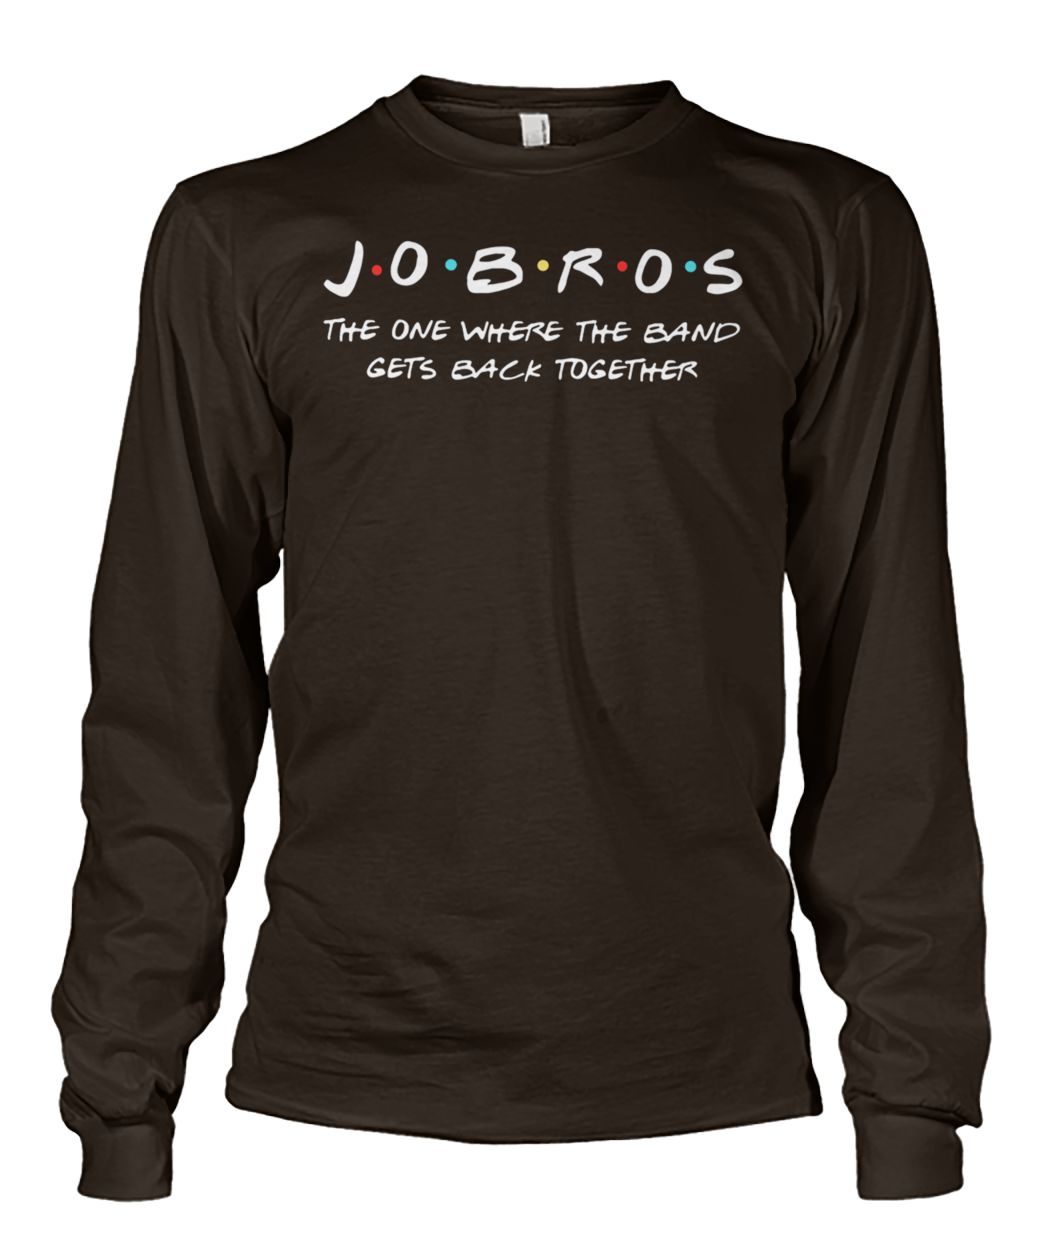 Jobros the one where the band gets back together unisex long sleeve